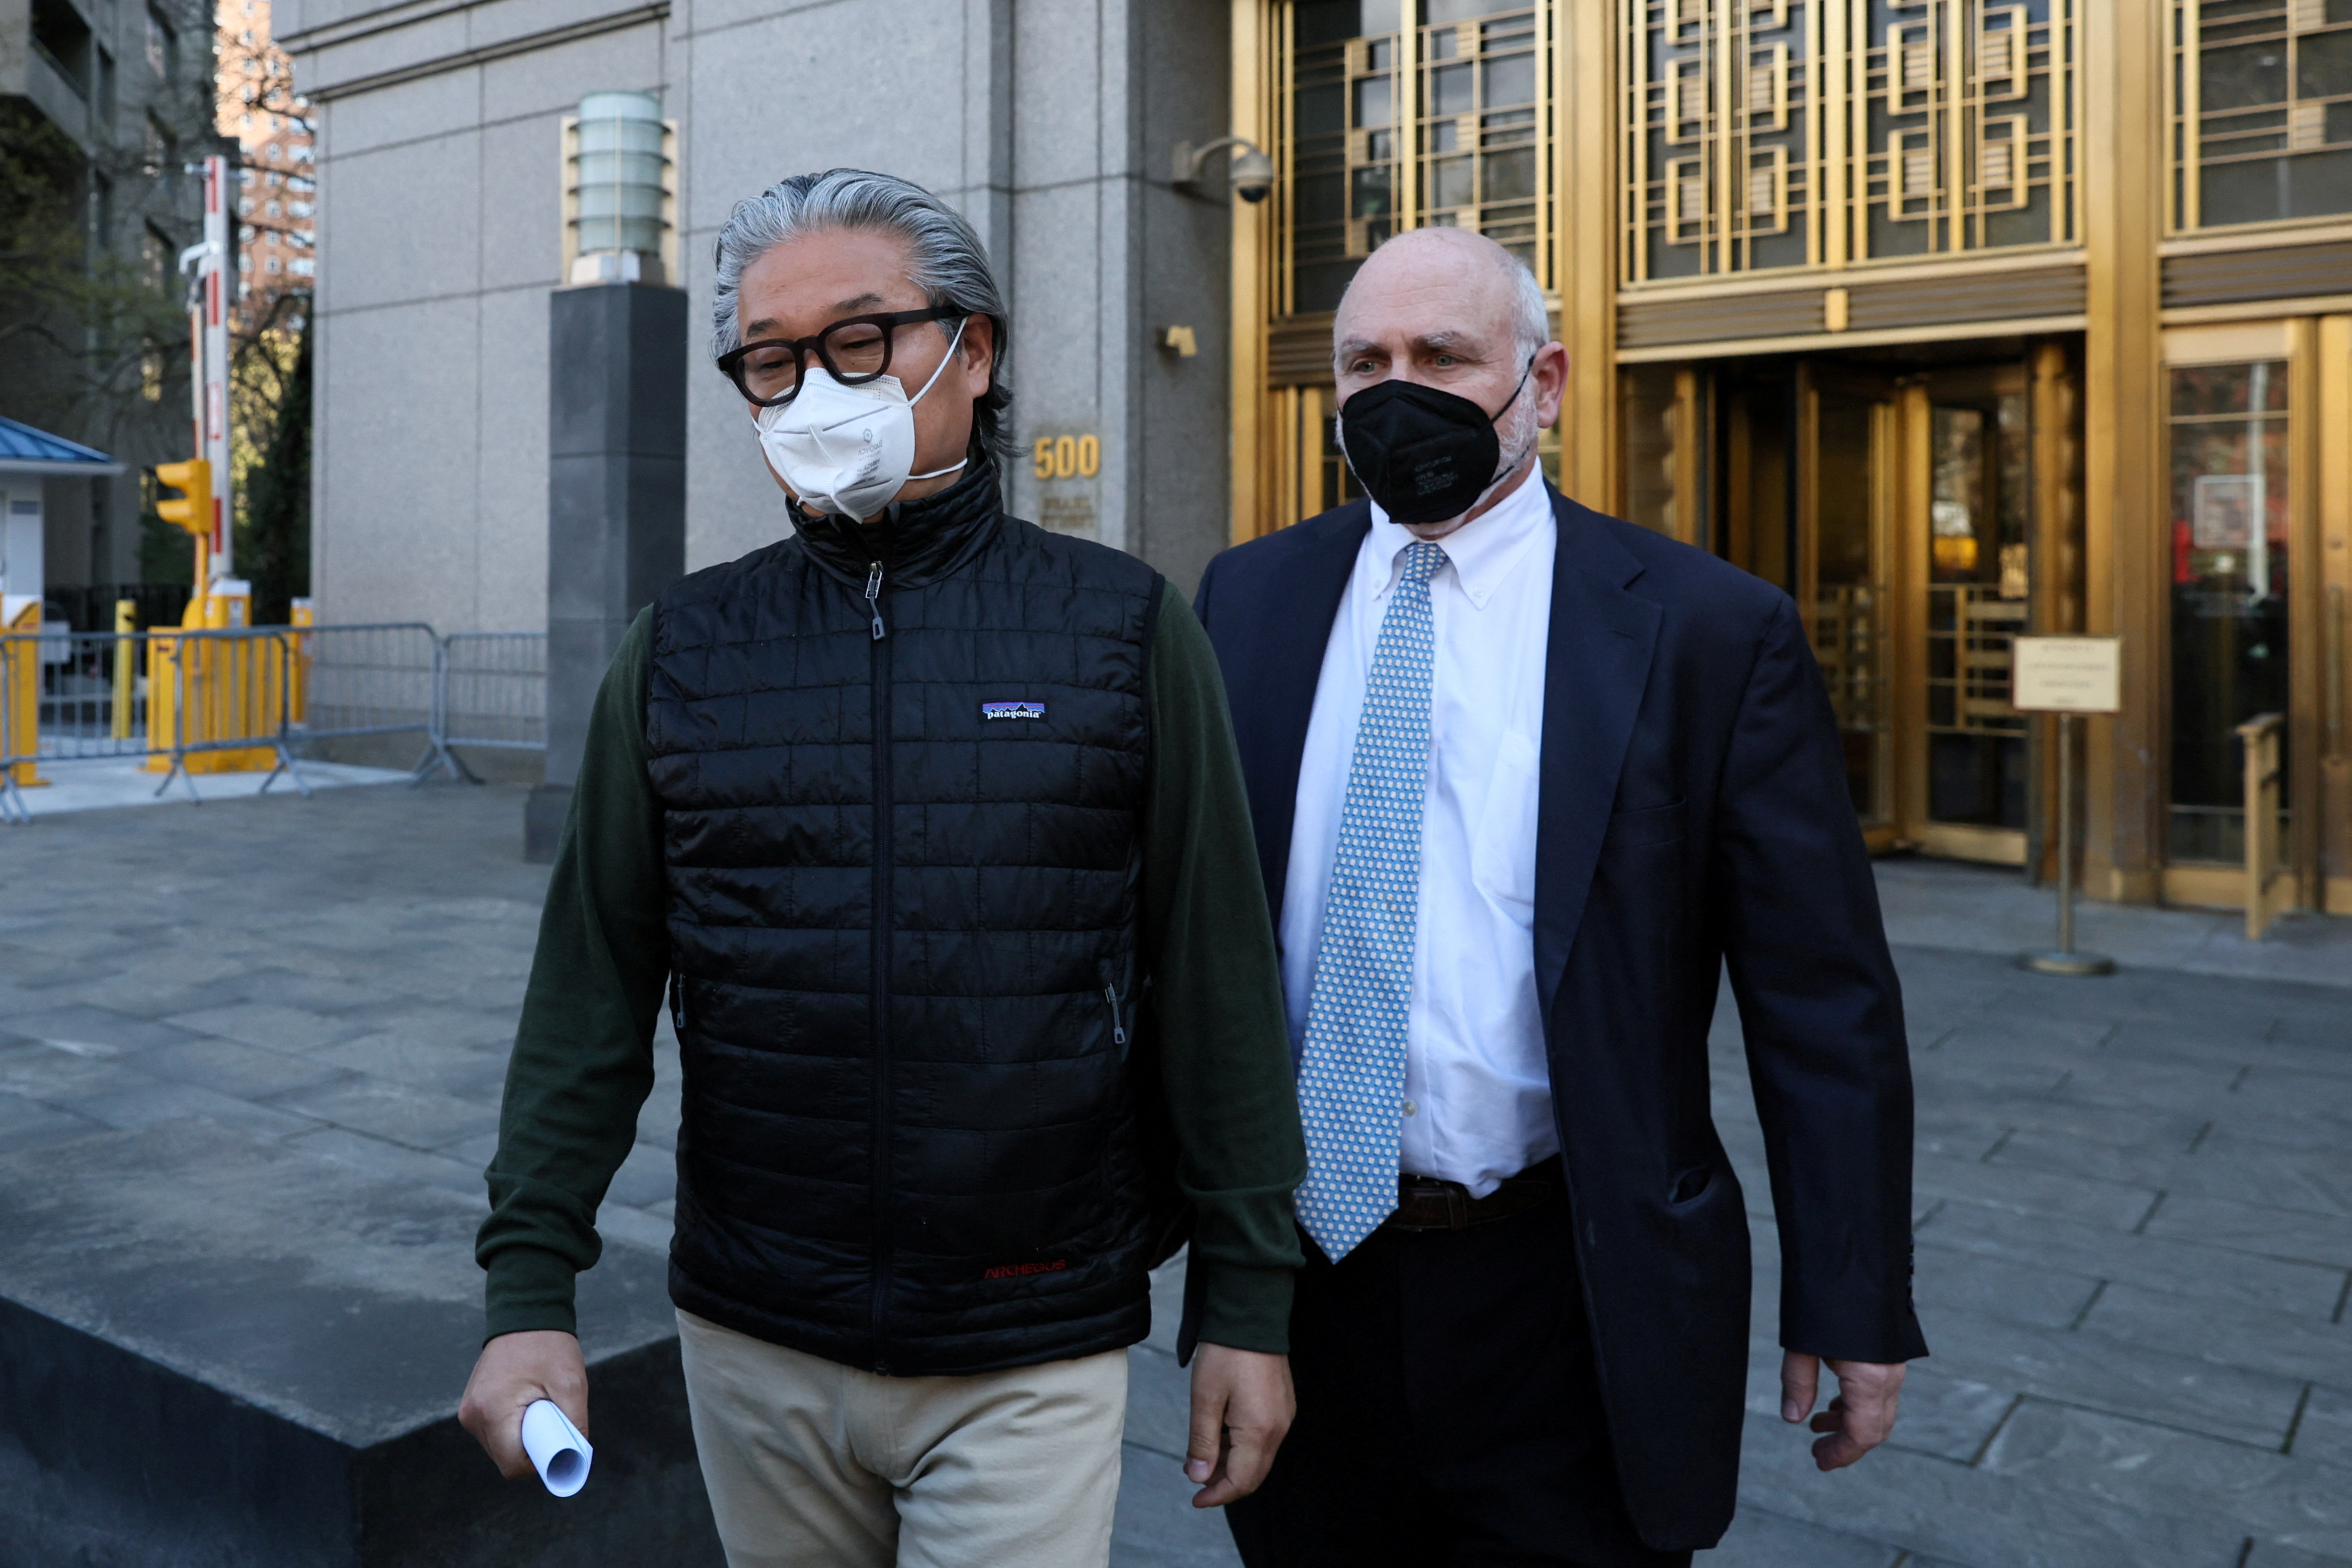 Sung Kook (Bill) Hwang exits the Manhattan federal courthouse in New York City